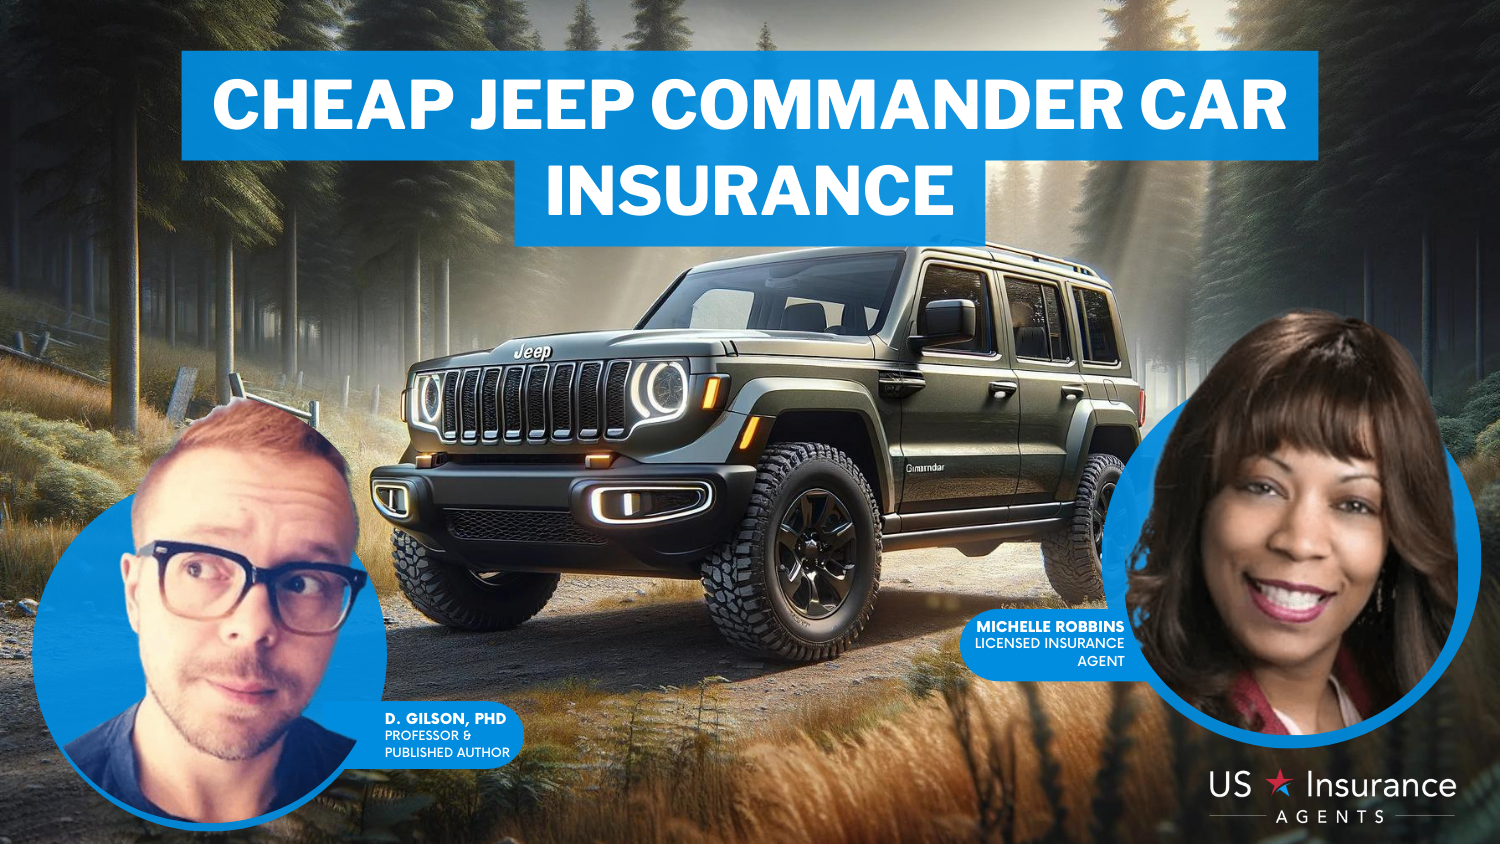 Allstate, USAA and Travelers: Cheap Jeep Commander Car Insurance